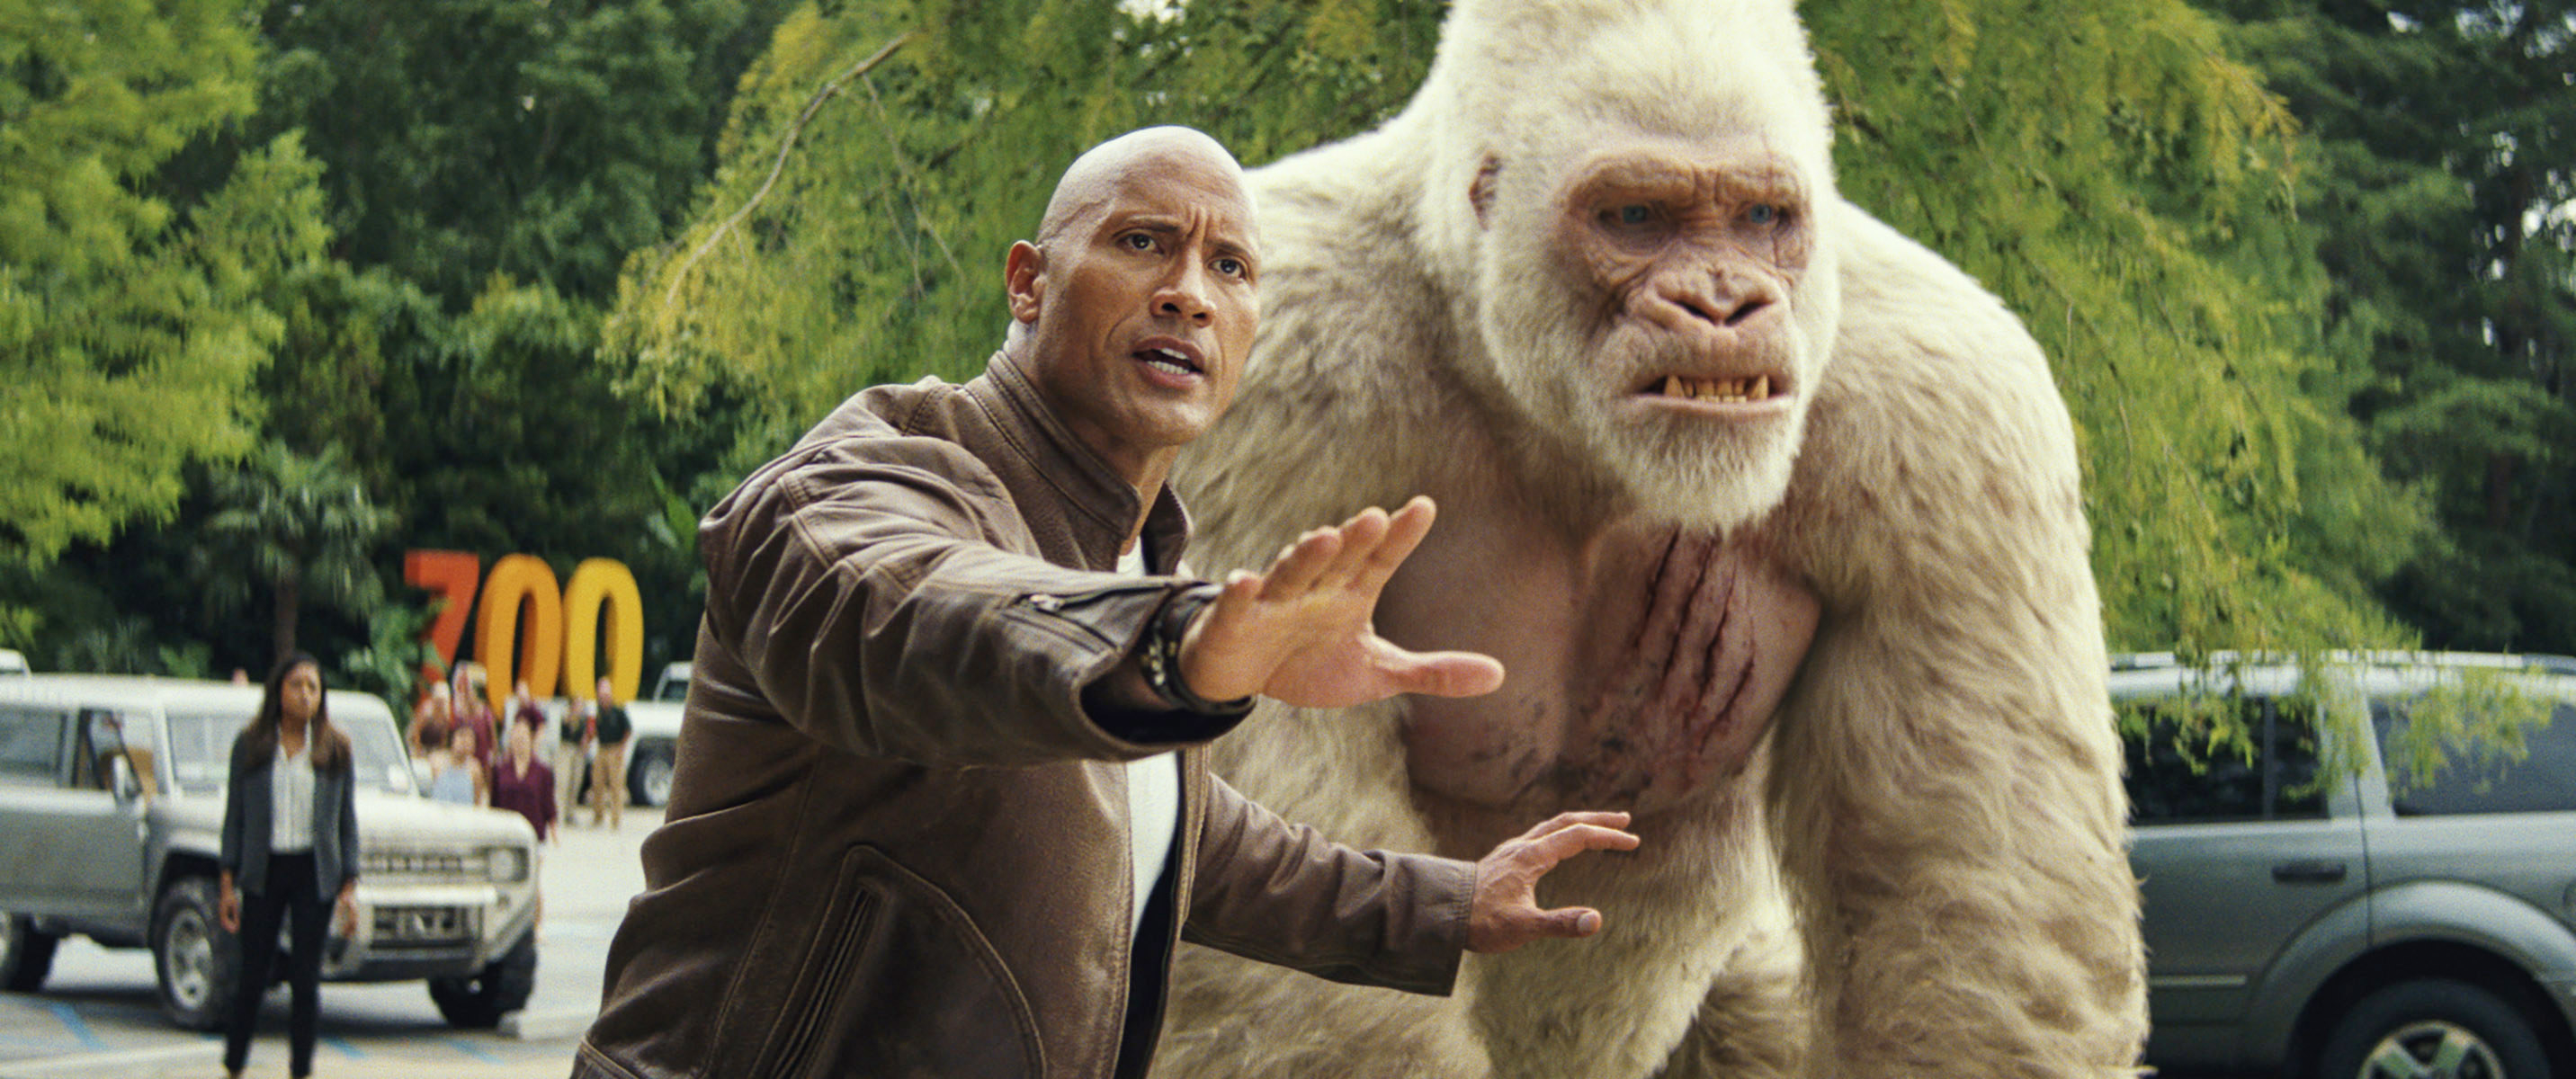 Johnson holds out a hand to protect the massive albino gorilla George